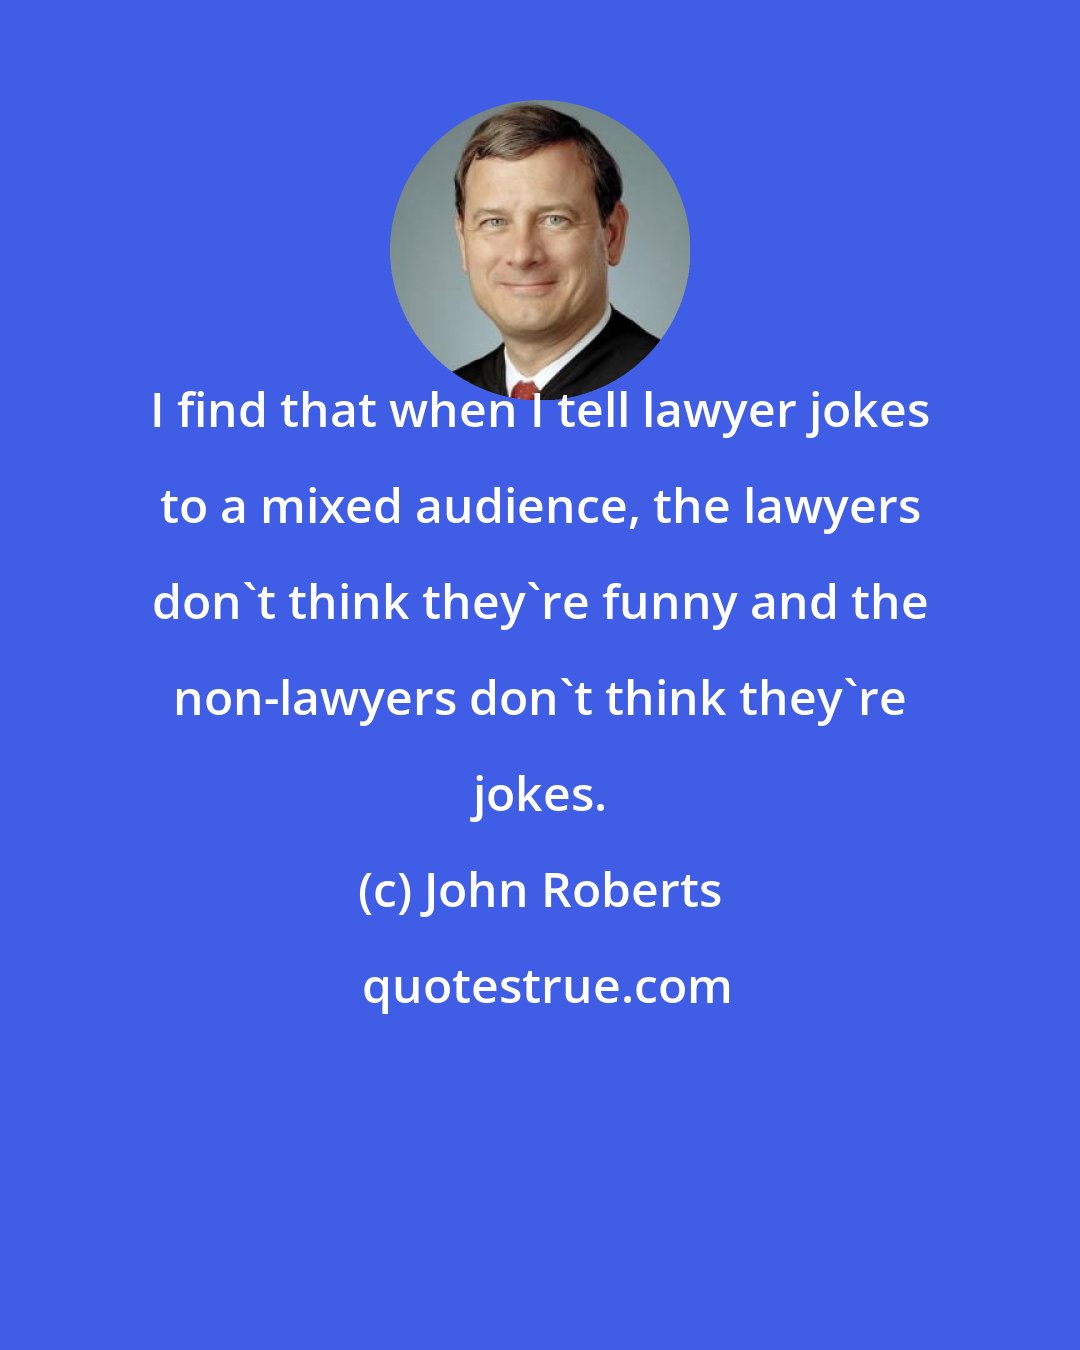 John Roberts: I find that when I tell lawyer jokes to a mixed audience, the lawyers don't think they're funny and the non-lawyers don't think they're jokes.